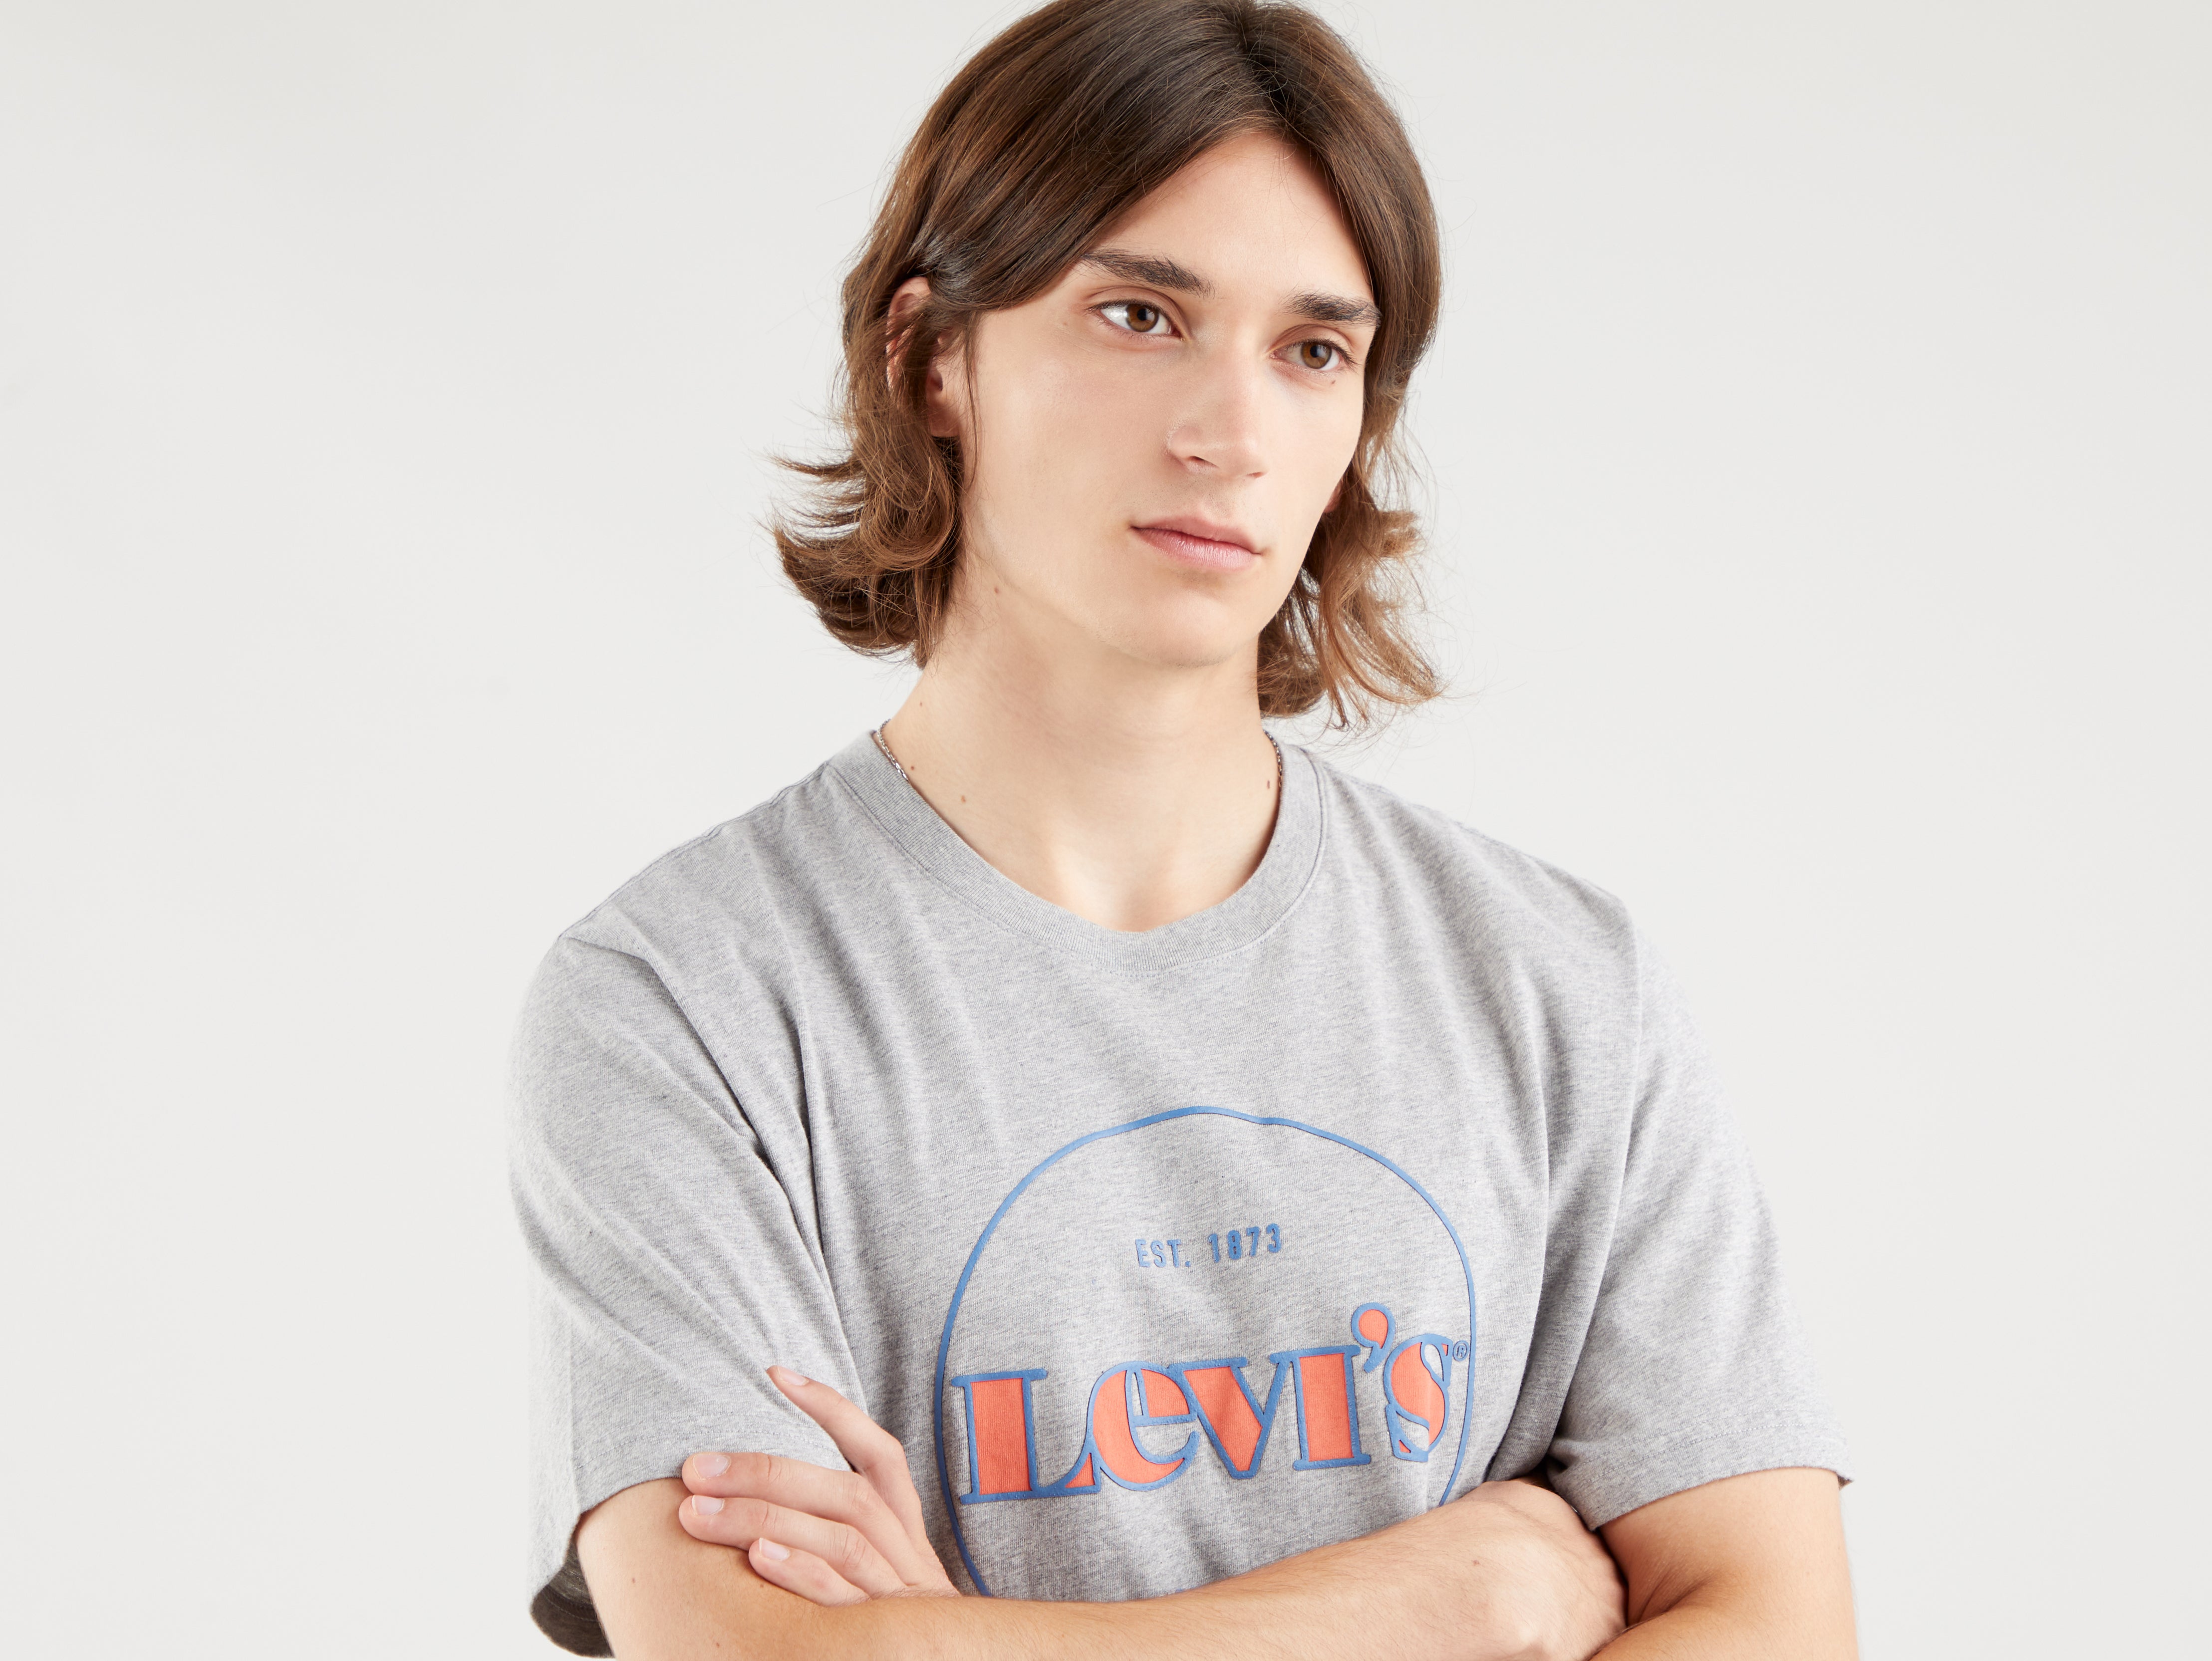 CAMISETA RELAXED FIT LEVI'S®  HOMBRE